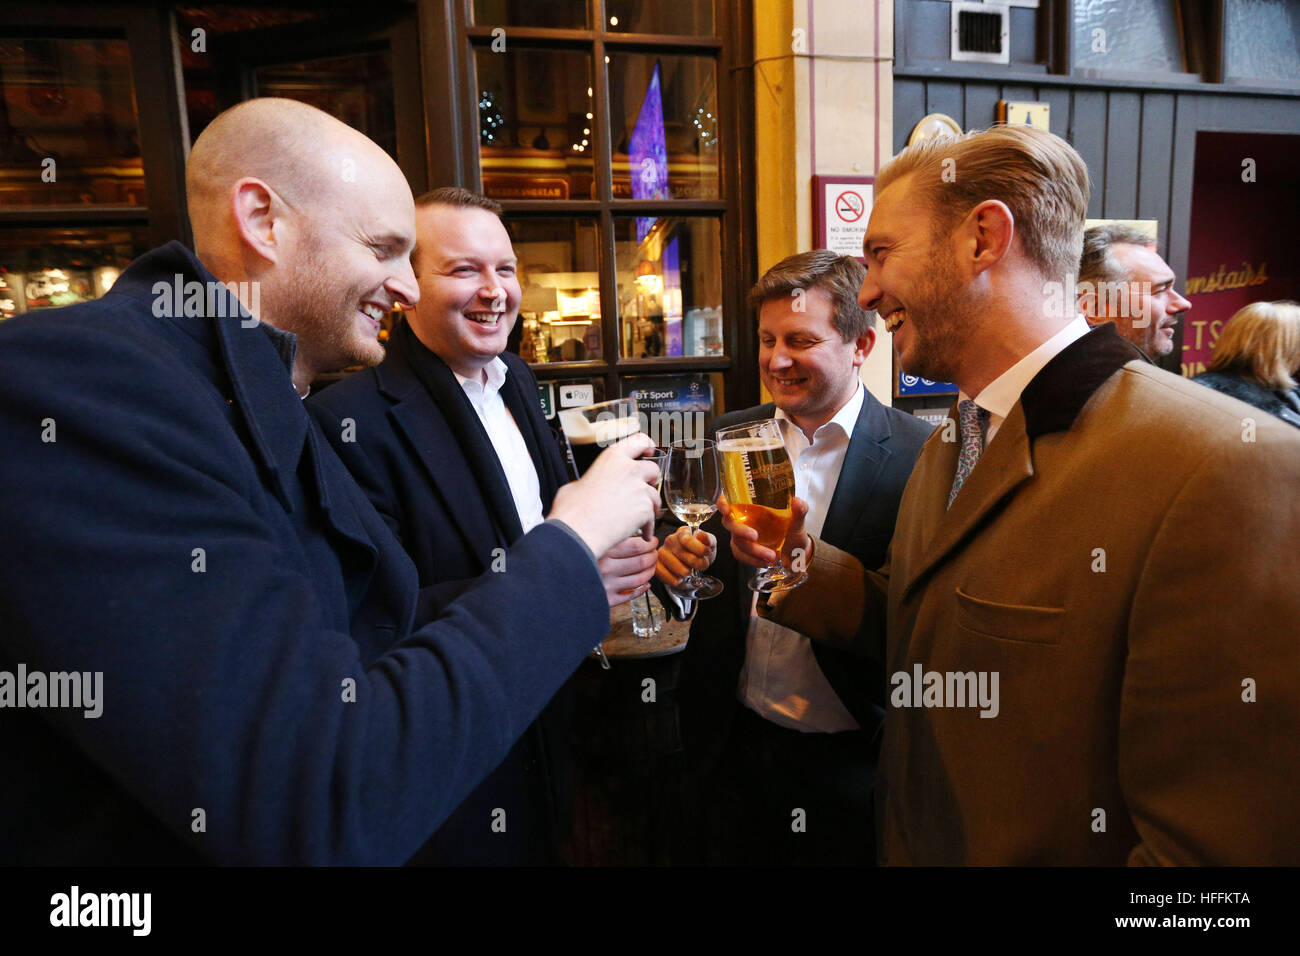 City workers (no names available) celebrate at the New Moon public house in Leadenhall Market, in the financial district of London, after the FTSE 100 index surged to an all-time high and recorded its best year since 2013. Stock Photo